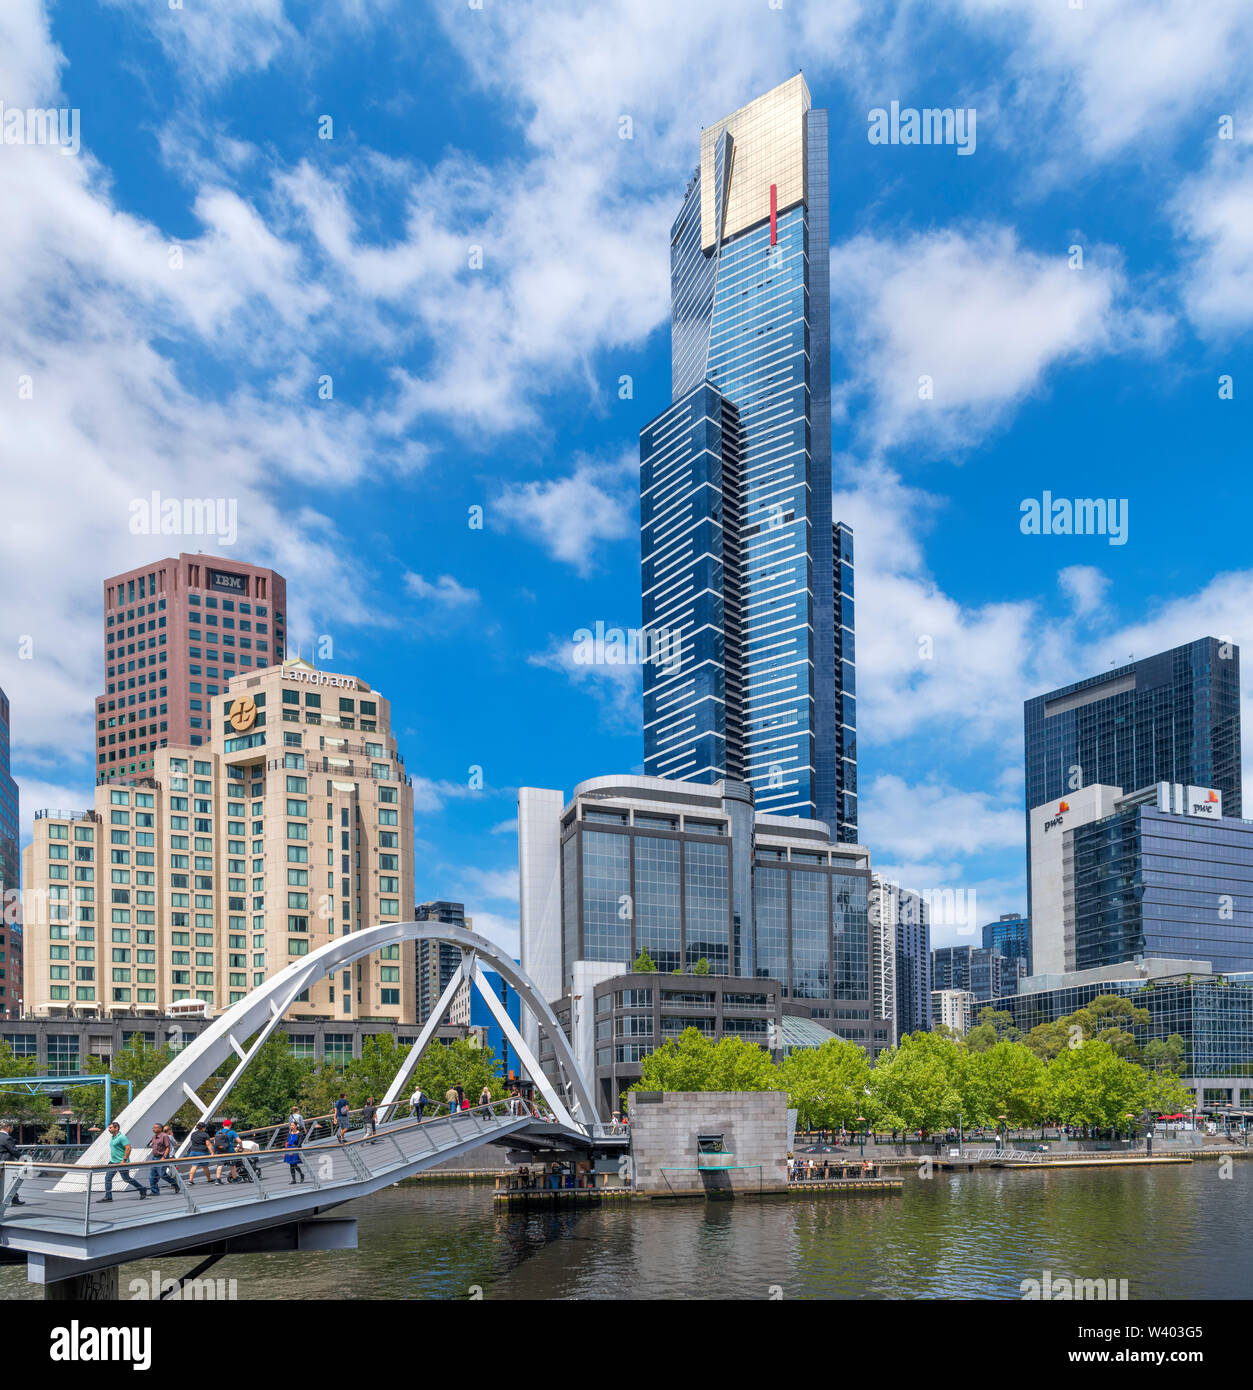 Eureka Tower and other high rise buildings on Southbank with Evan Walker Bridge crossing the Yarra River in foreground, Melbourne, Victoria, Australia Stock Photo